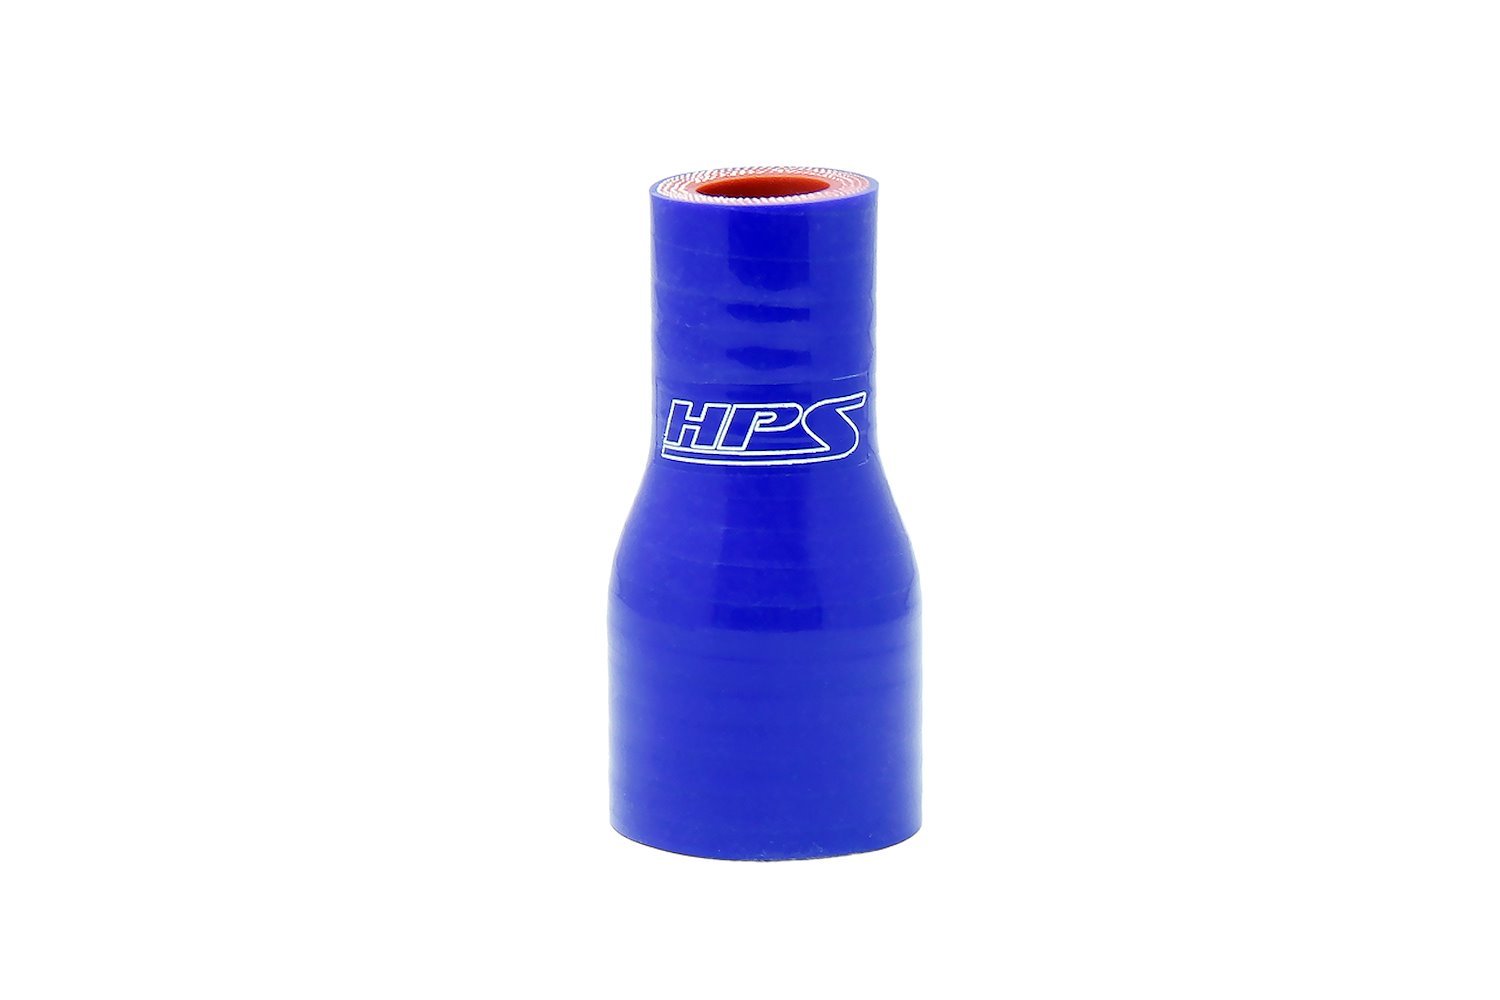 HTSR-125-138-L4-BLUE Silicone Reducer Hose, High-Temp 4-Ply Reinforced, 1-1/4 in. - 1-3/8 in. ID, 4 in. Long, Blue